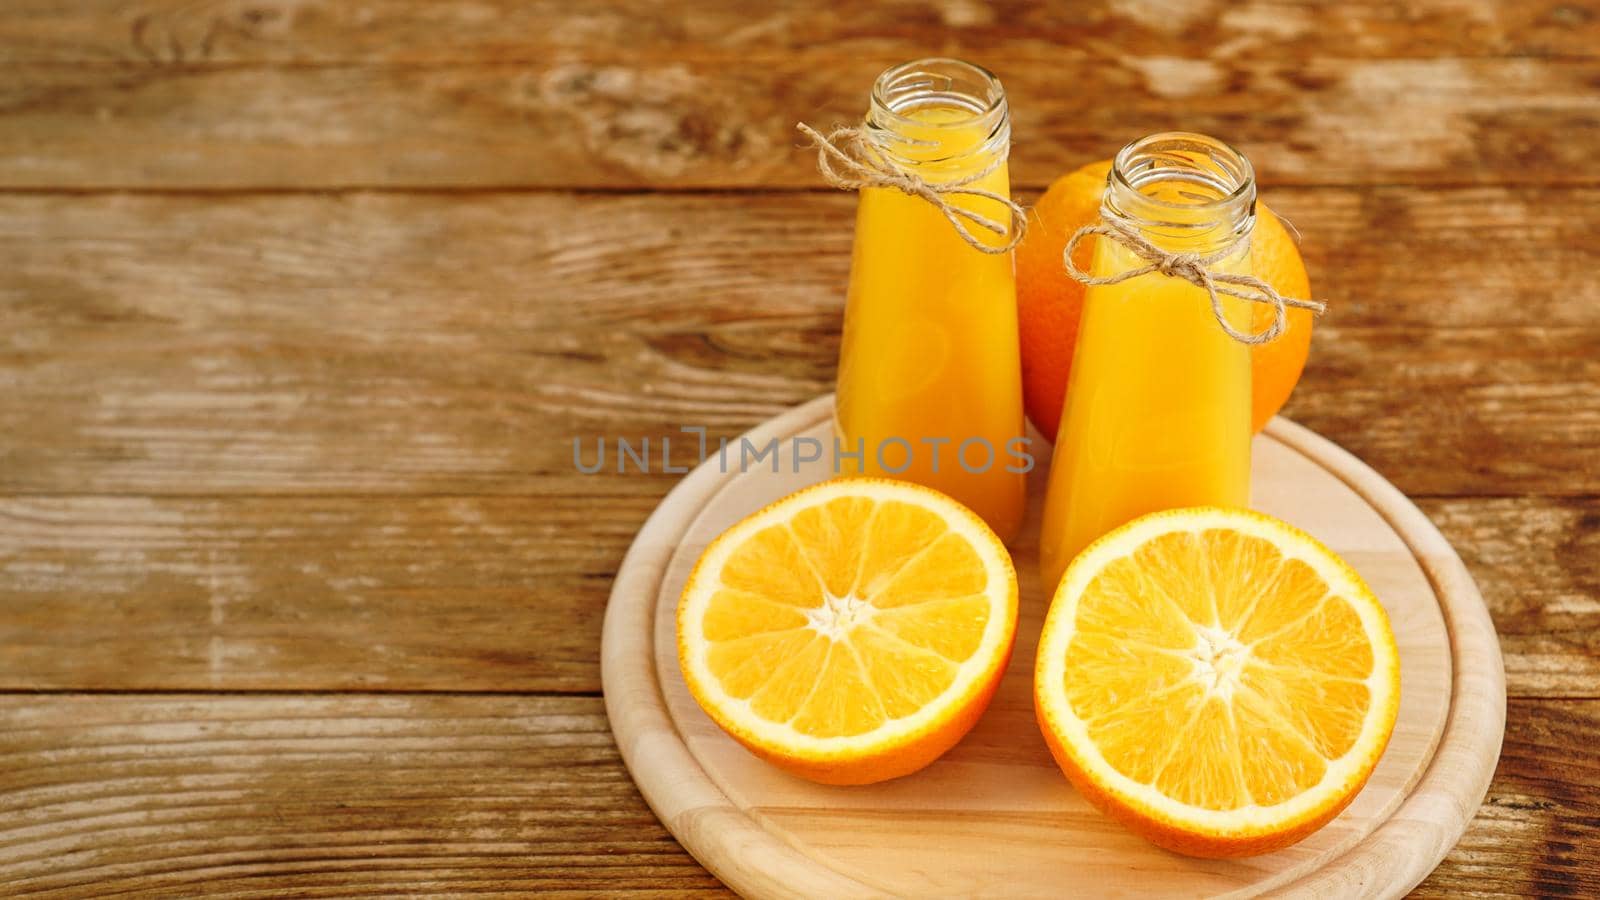 Fresh orange juice on wooden table on a wooden board. Sliced oranges and two bottles of juice